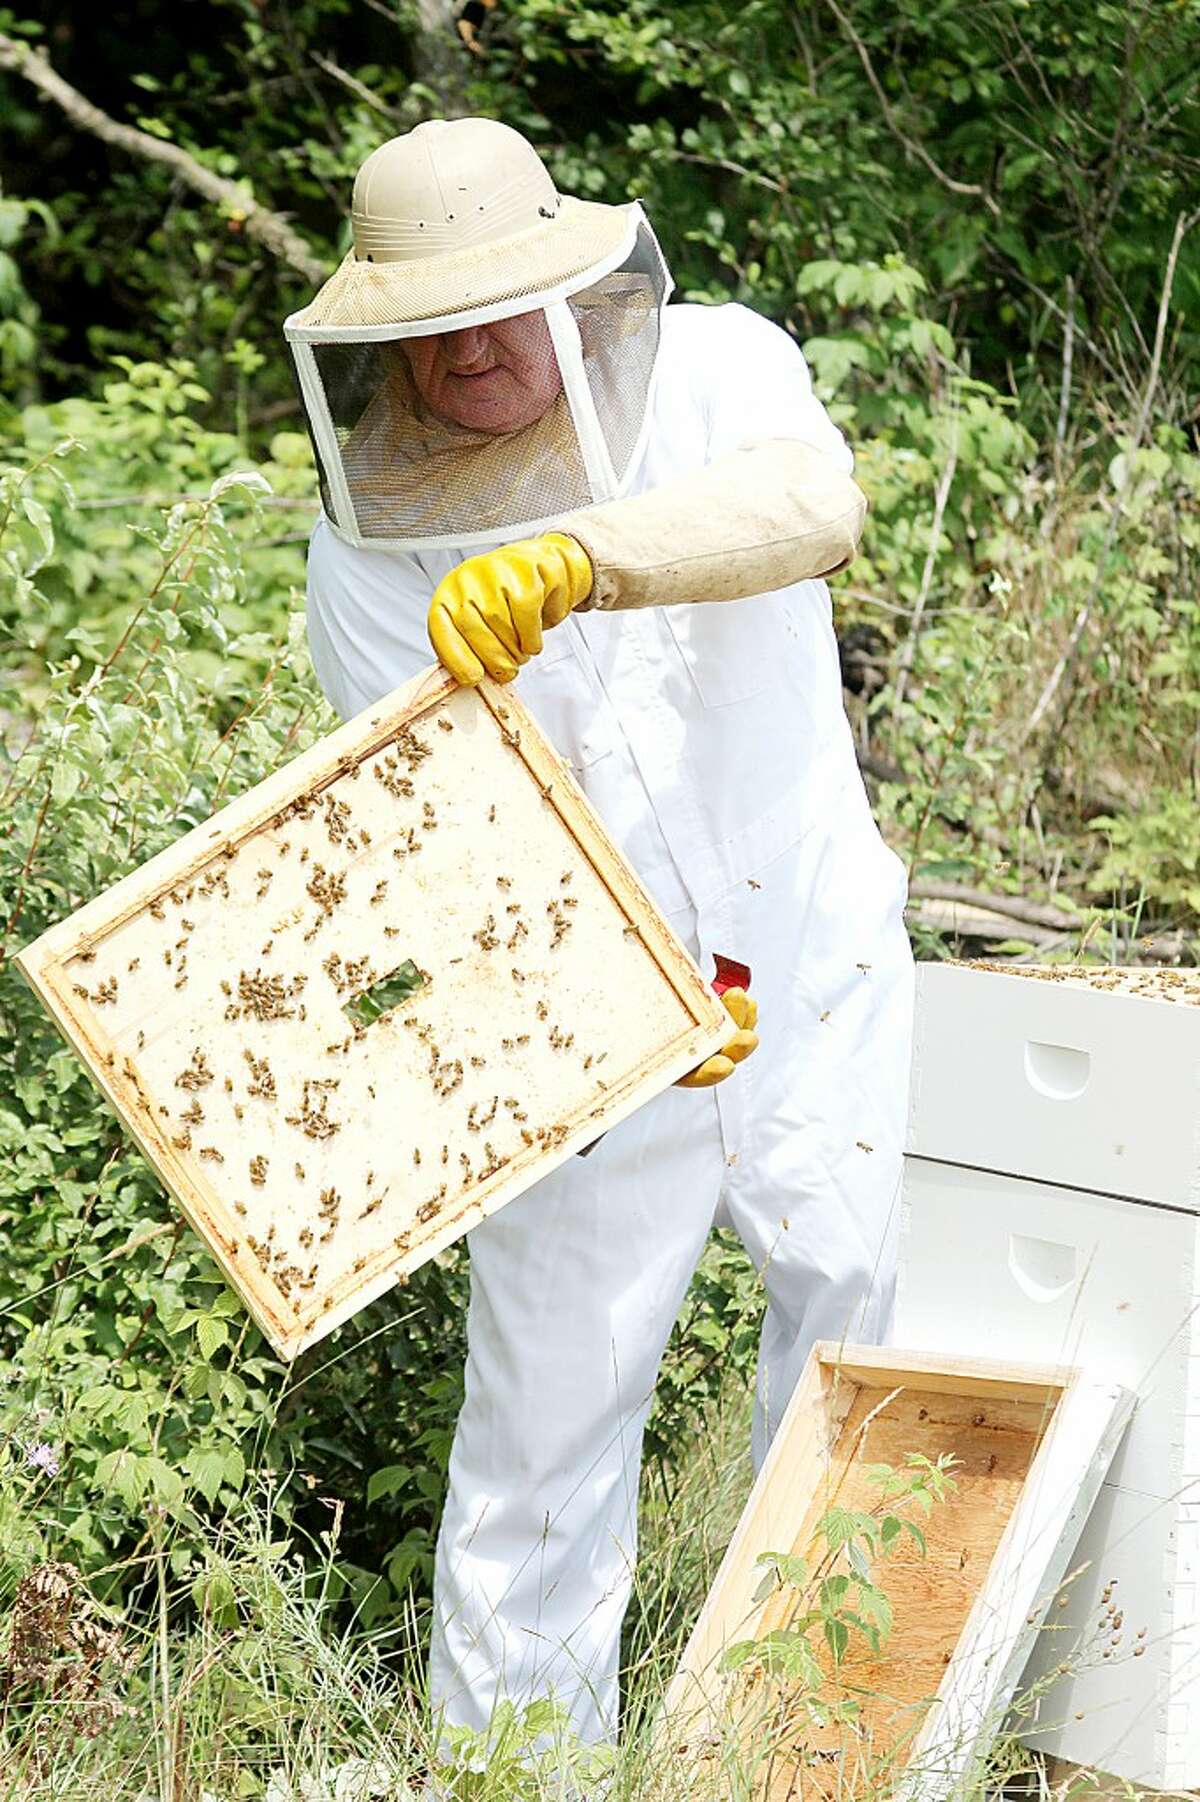 BUSY WORKERS: Around 600,000 bees live in Terry Peterson’s 21 bee hives. The bees are controlled by the scent of the queen bee. (Pioneer News Network photos/Sarah Neubecker)